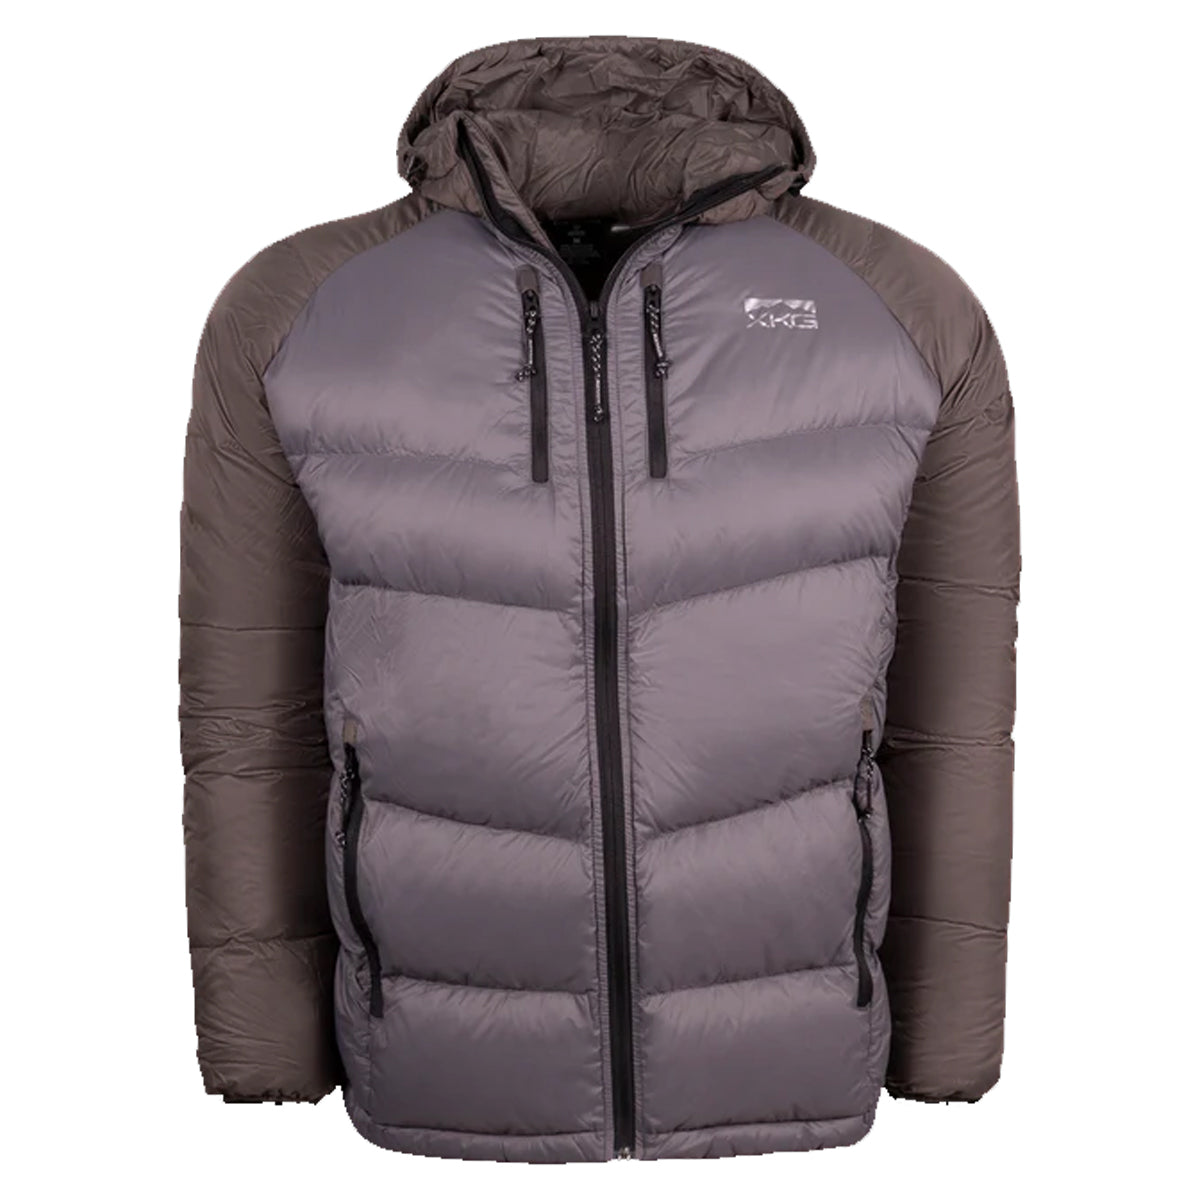 King's XKG Down Transition Jacket in Charcoal by GOHUNT | King's - GOHUNT Shop